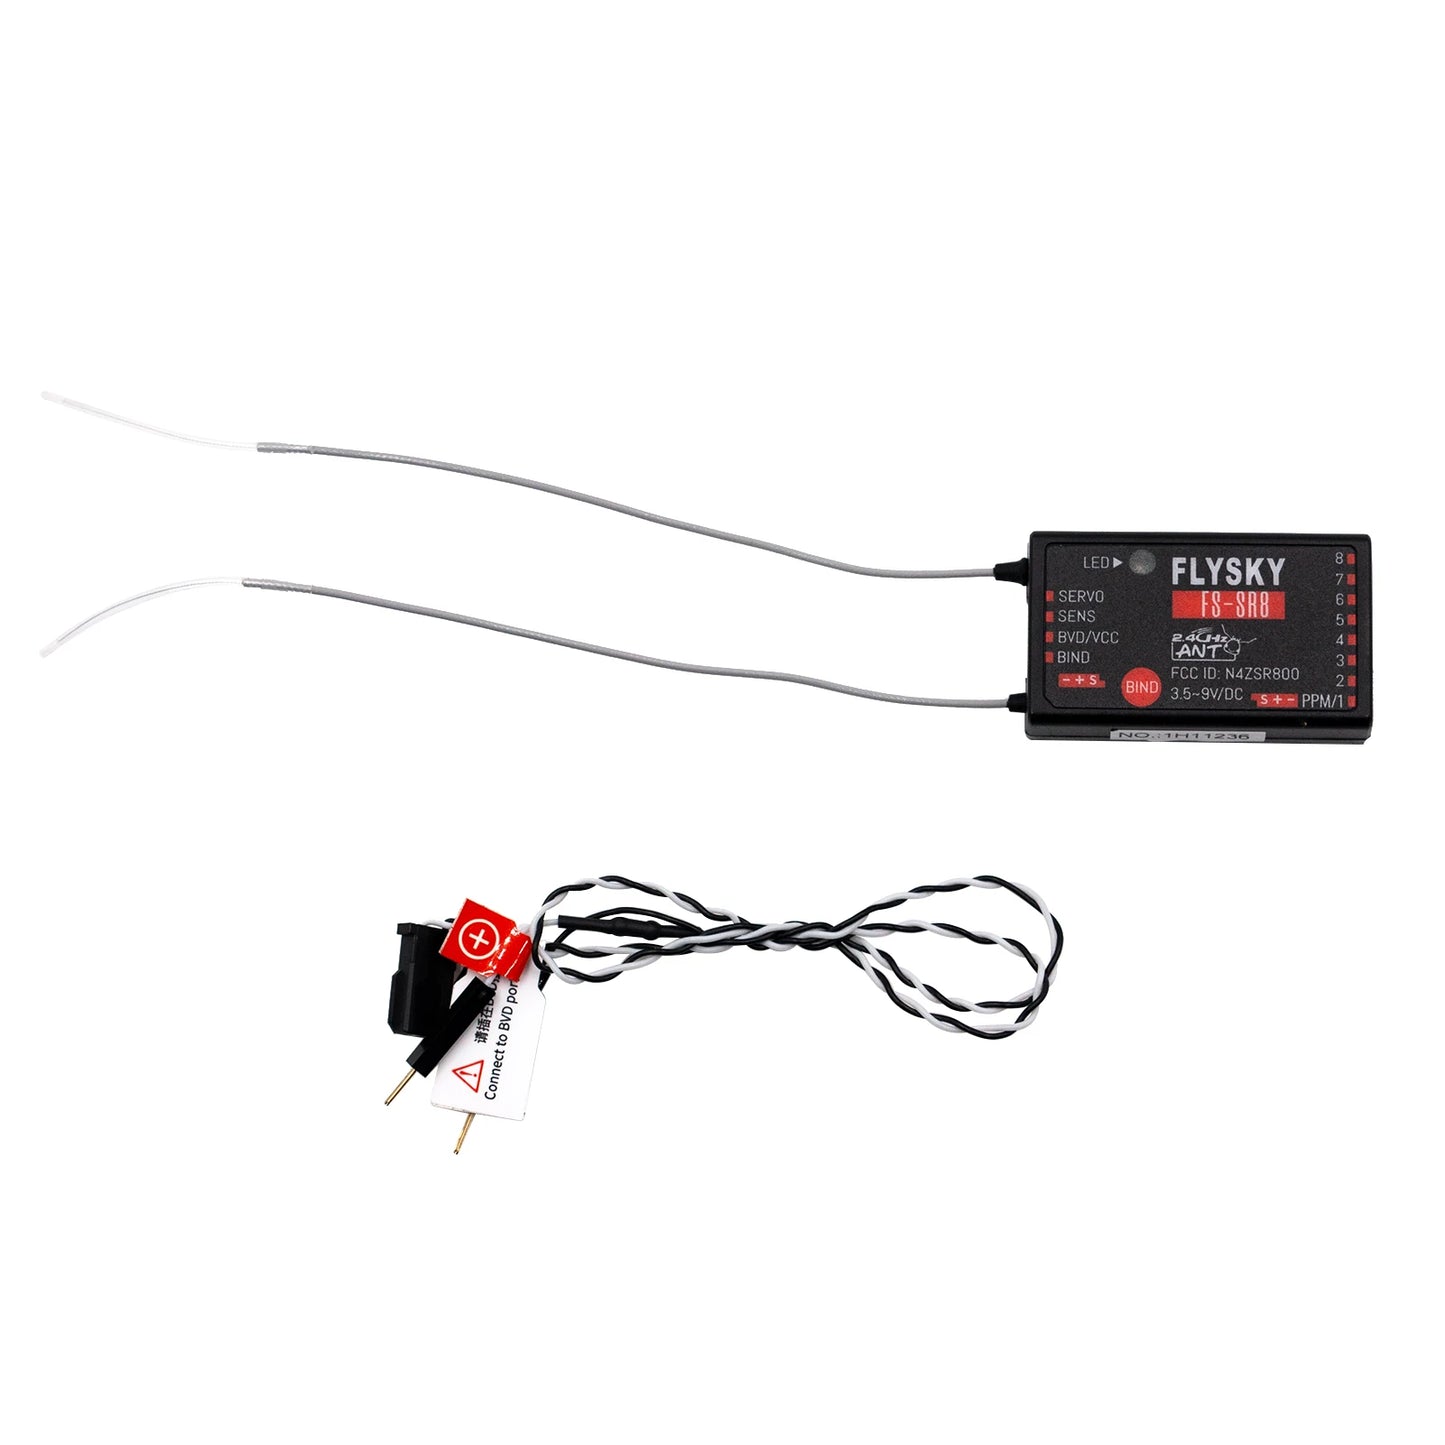 FLYSKY FS-SR8 2.4G 8CH Receiver - ANT Protocol 3.5~9V/DC Receiver for FS-ST8 RC Helicopters Car Boat Remote Controller